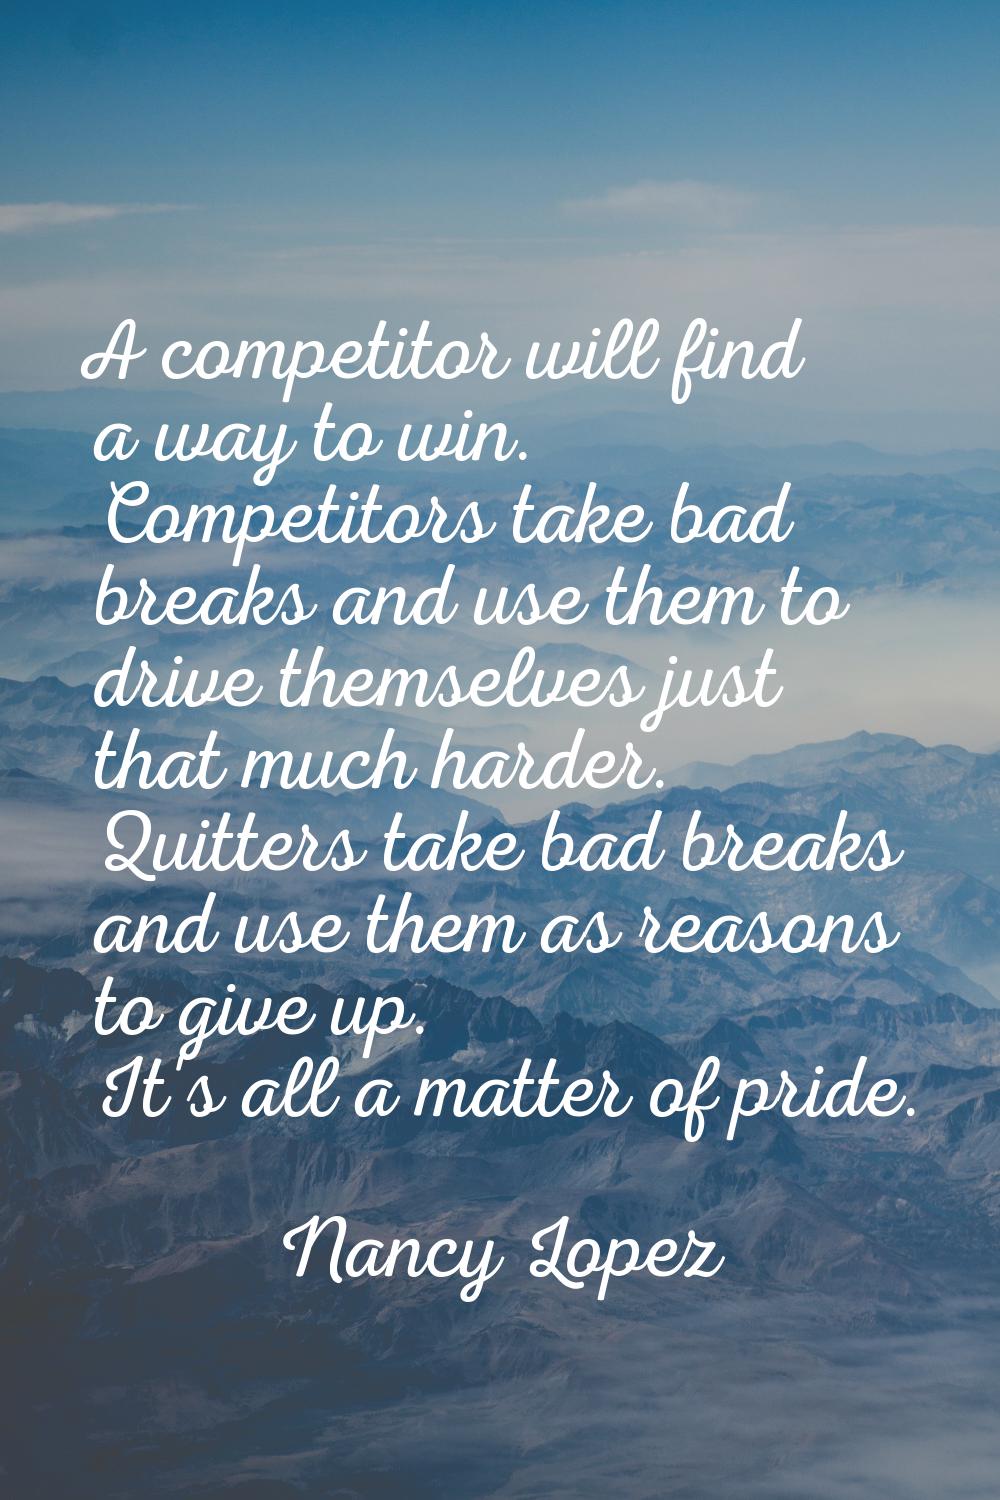 A competitor will find a way to win. Competitors take bad breaks and use them to drive themselves j